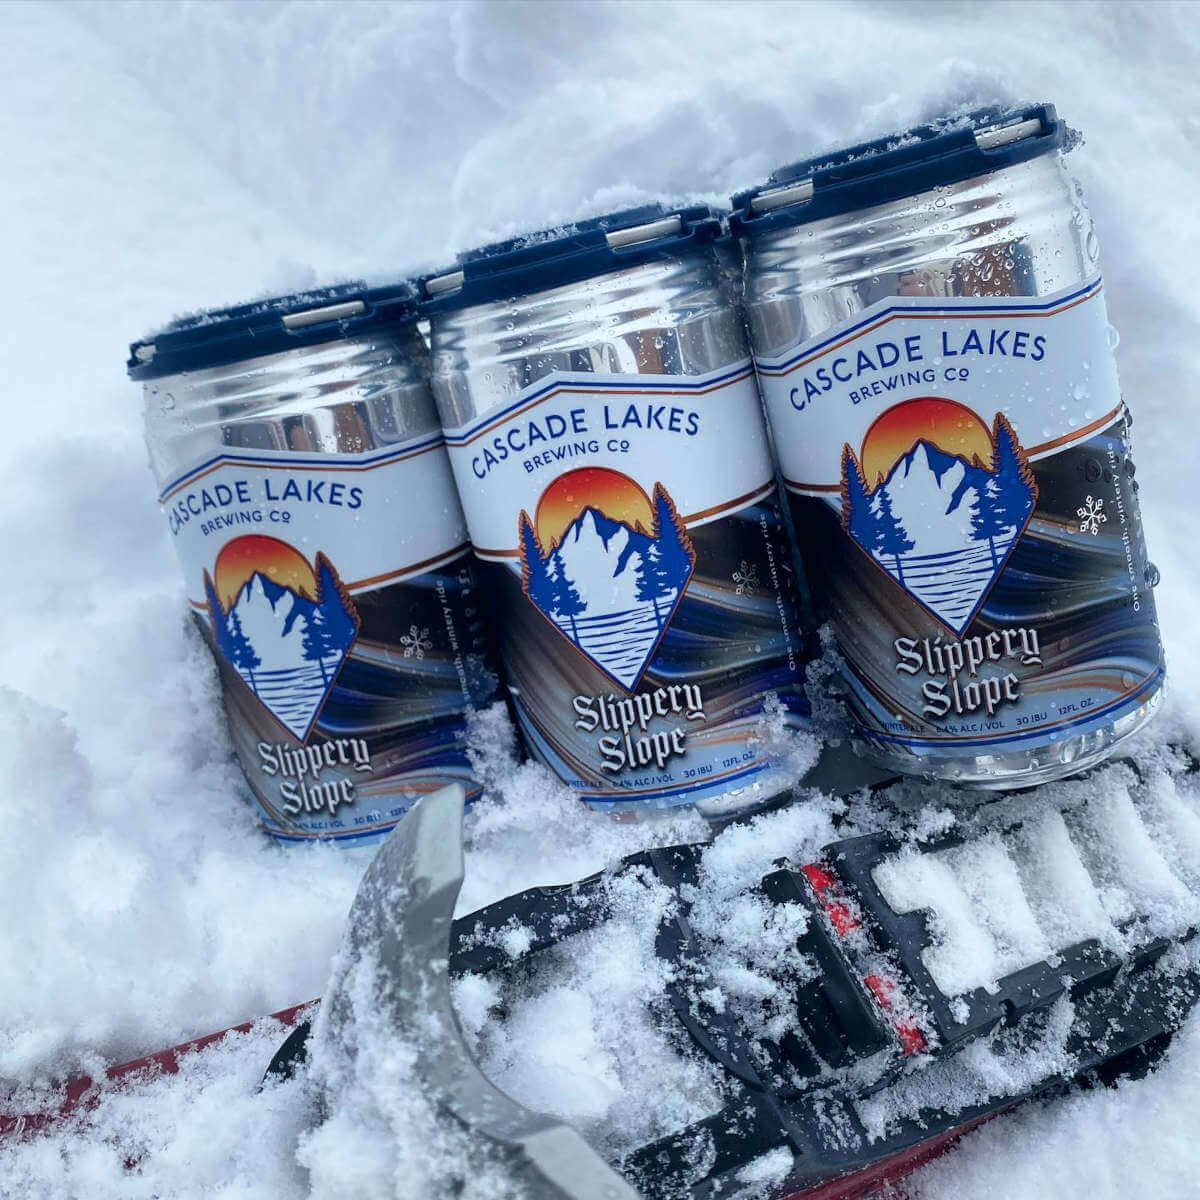 Slippery Slope Winter Ale from Cascade Lakes Brewing returns